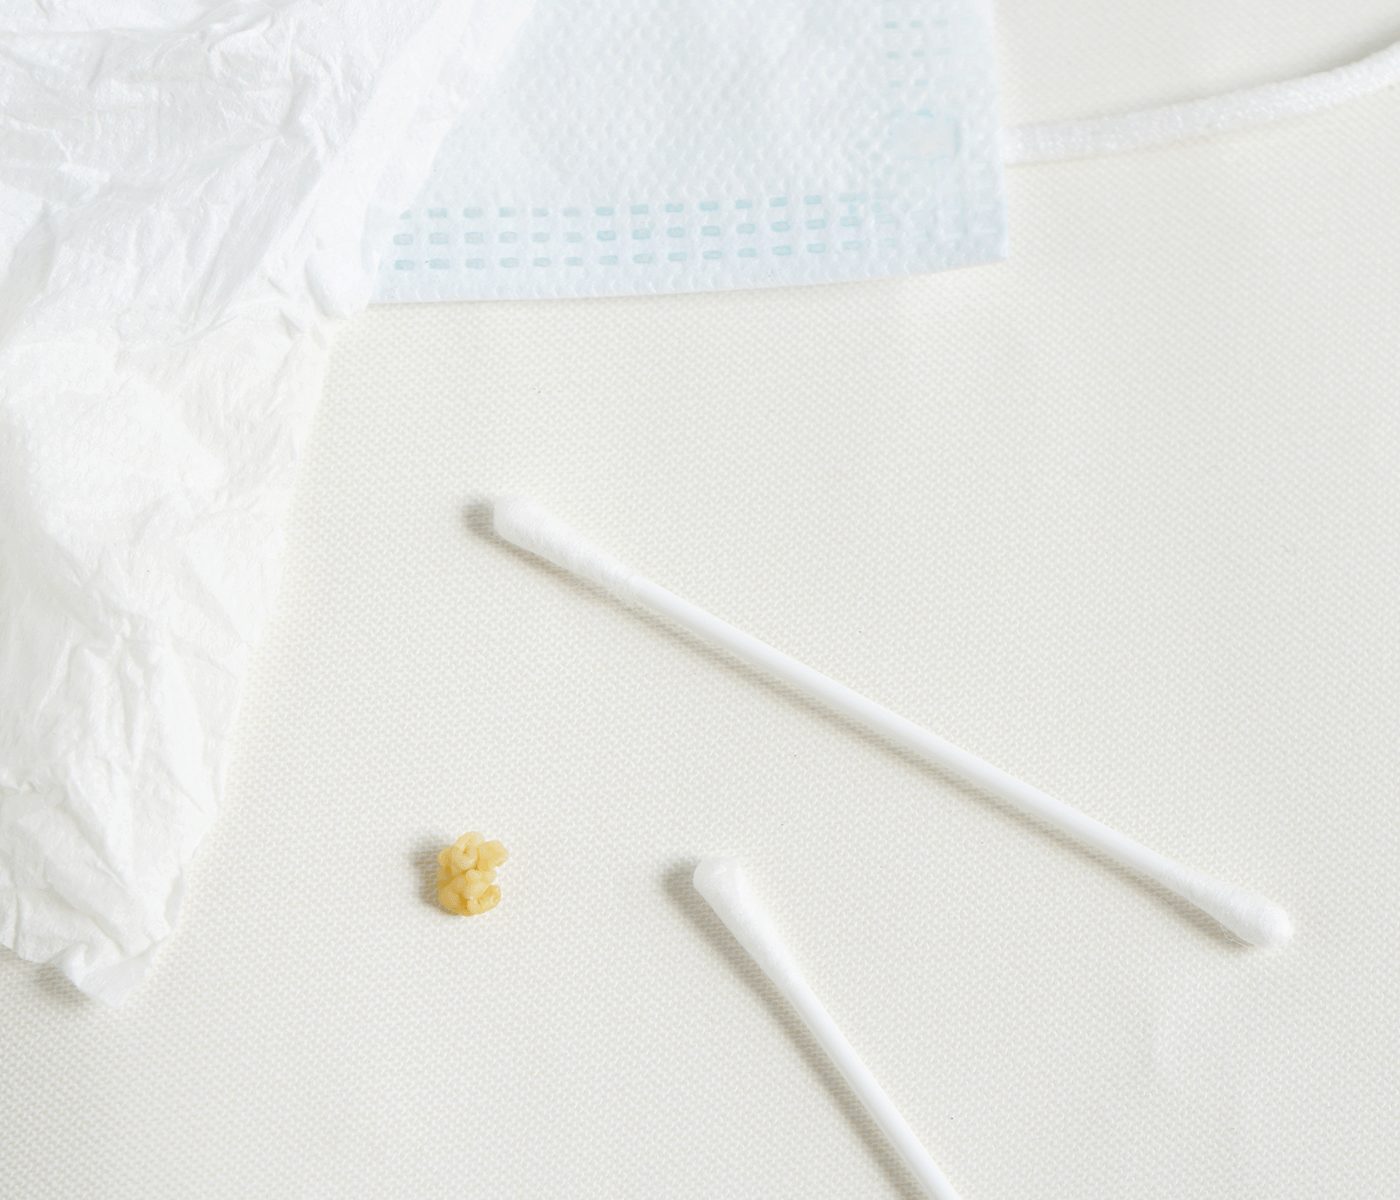 Tonsil stone and cotton swabs